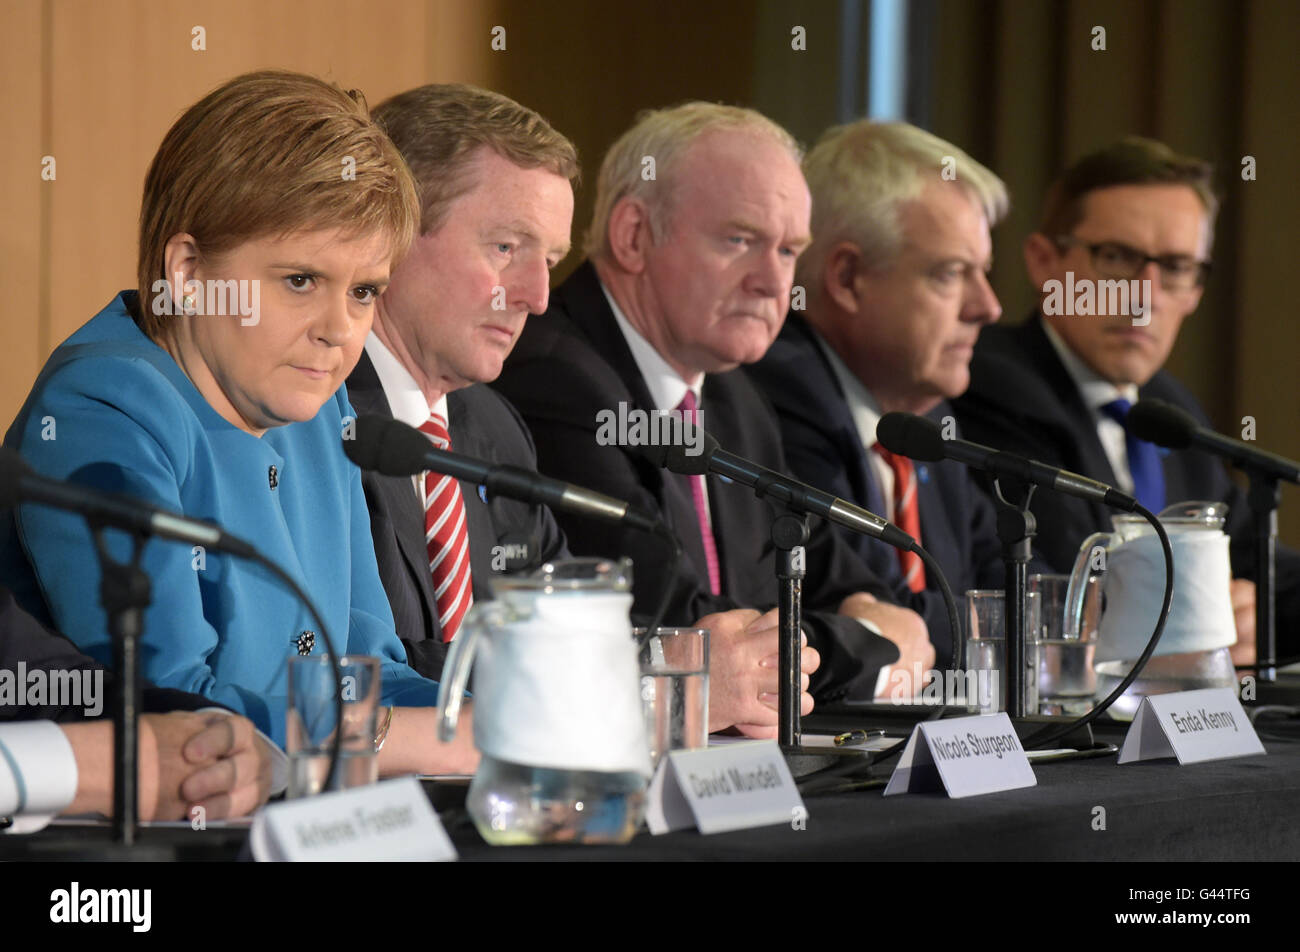 First Minister of Scotland Nicola Sturgeon, Taoiseach Enda Kenny, Martin McGuinness deputy First Minister Northern Ireland, Carwyn Jones First Minister of Wales and Senator Ian Gorst Chief Minister Government of Jersey at a press conference during the British-Irish Council Summit meeting hosted by the Scottish Government in Glasgow. Stock Photo